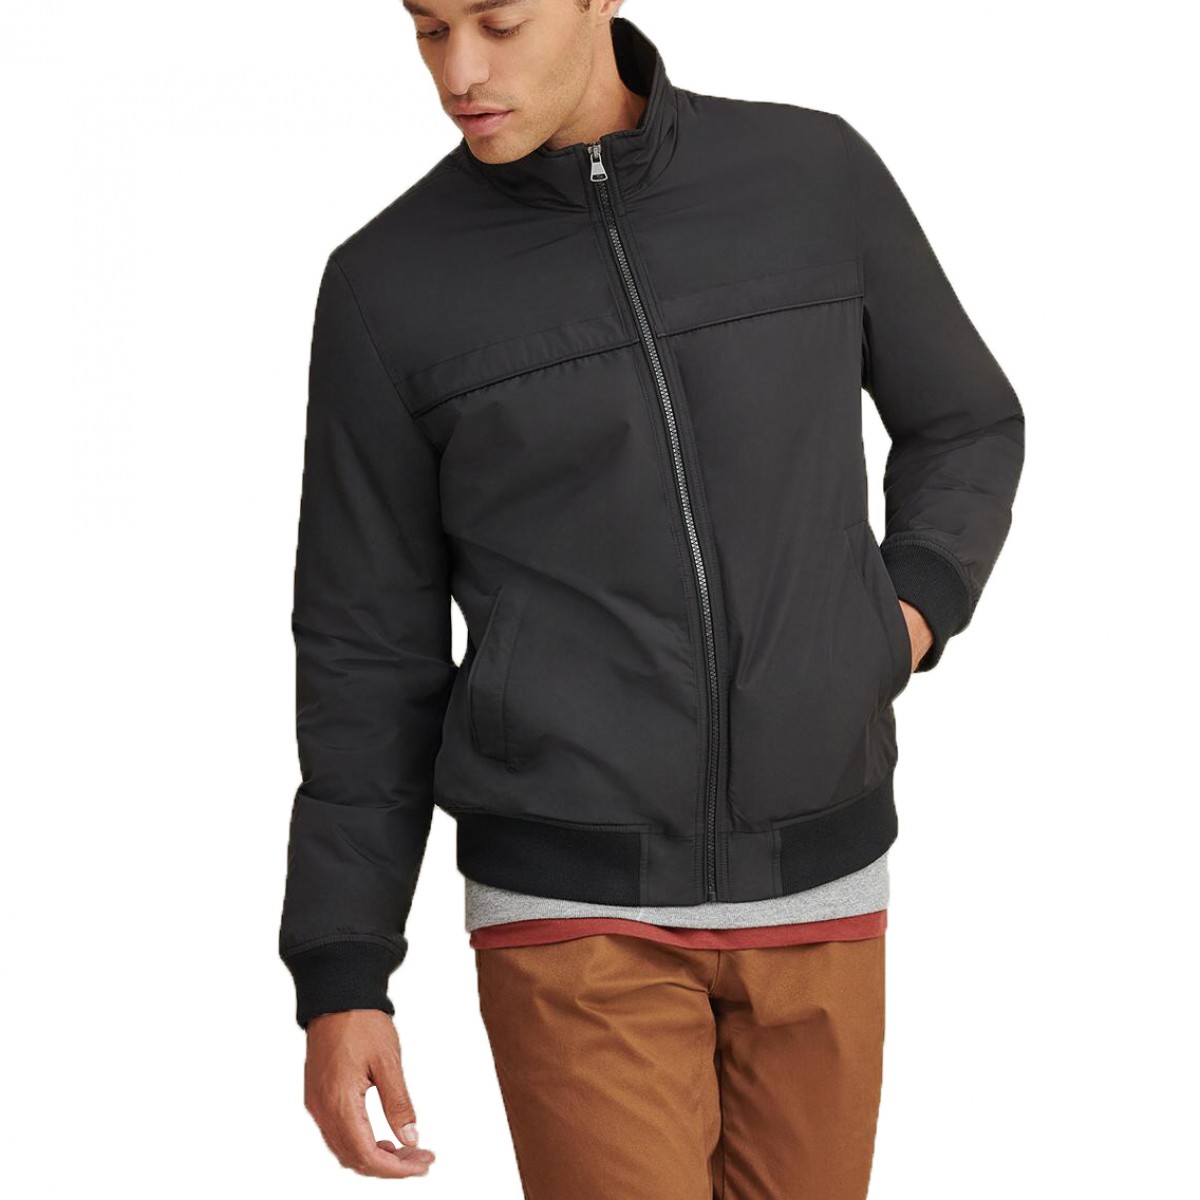 Classic Leather Jackets For Men - Ionia Sports